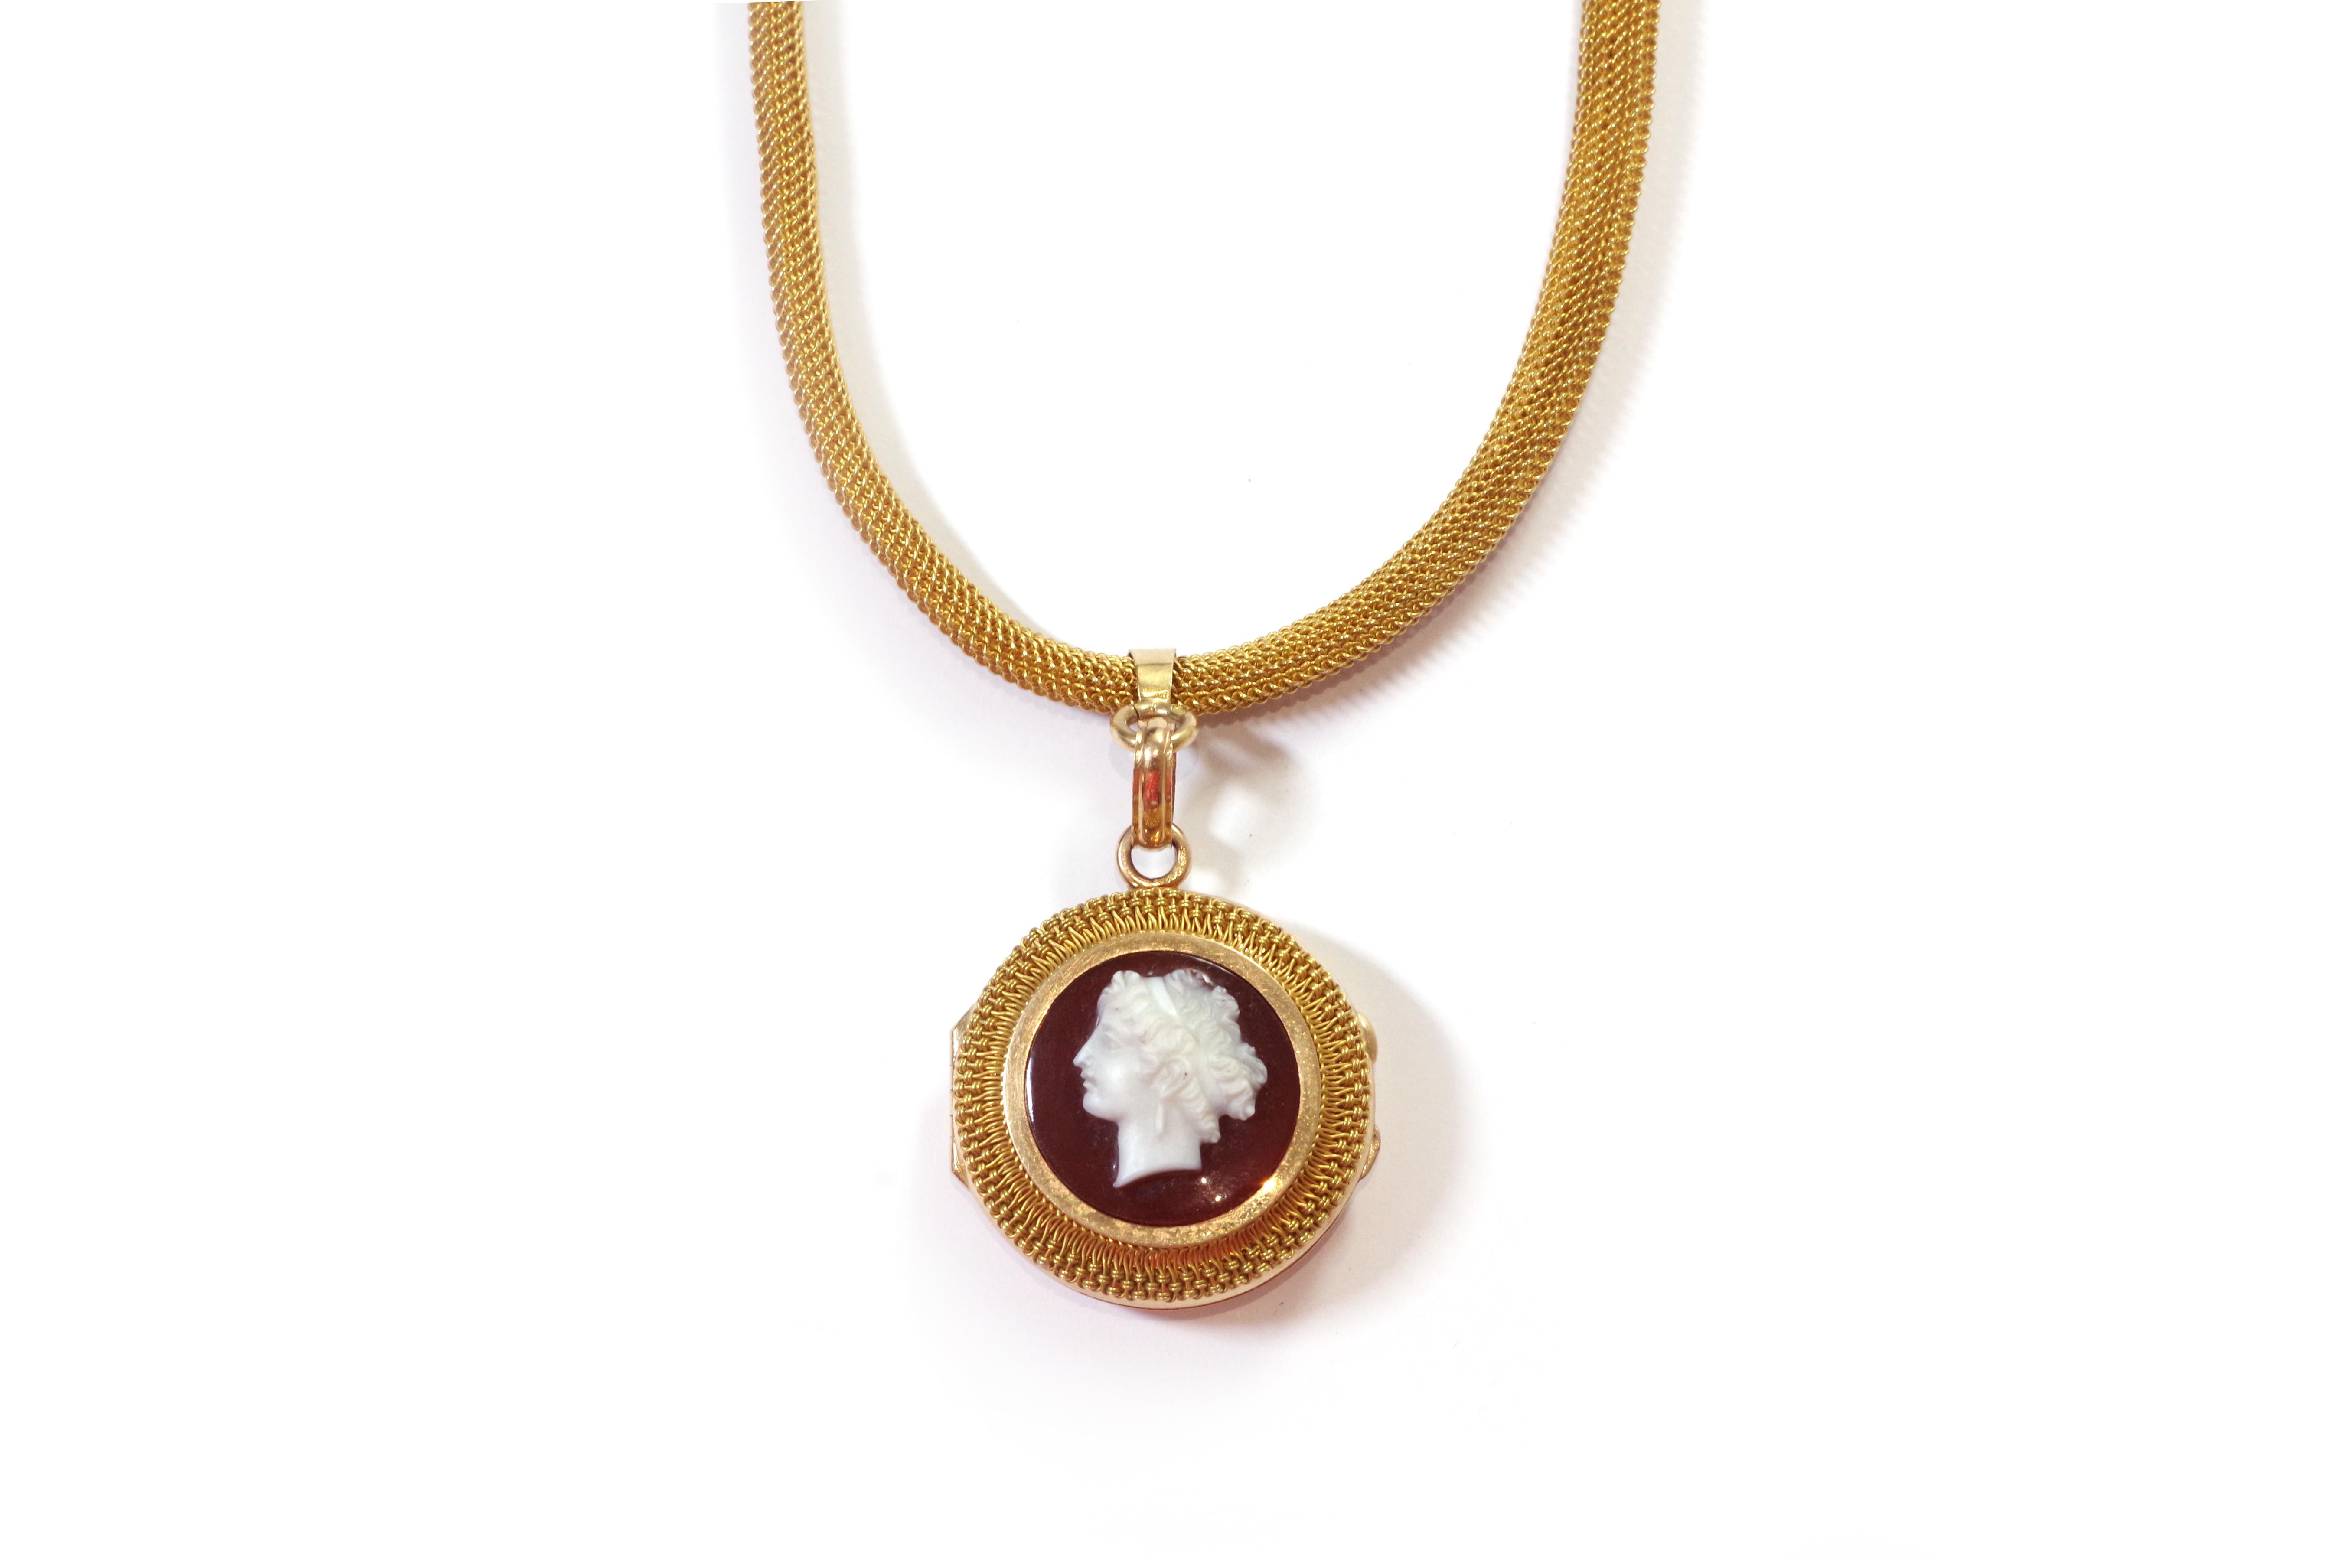 Victorian Antique necklace cameo pendant in 18k gold, victorian agate cameo locket pendant For Sale